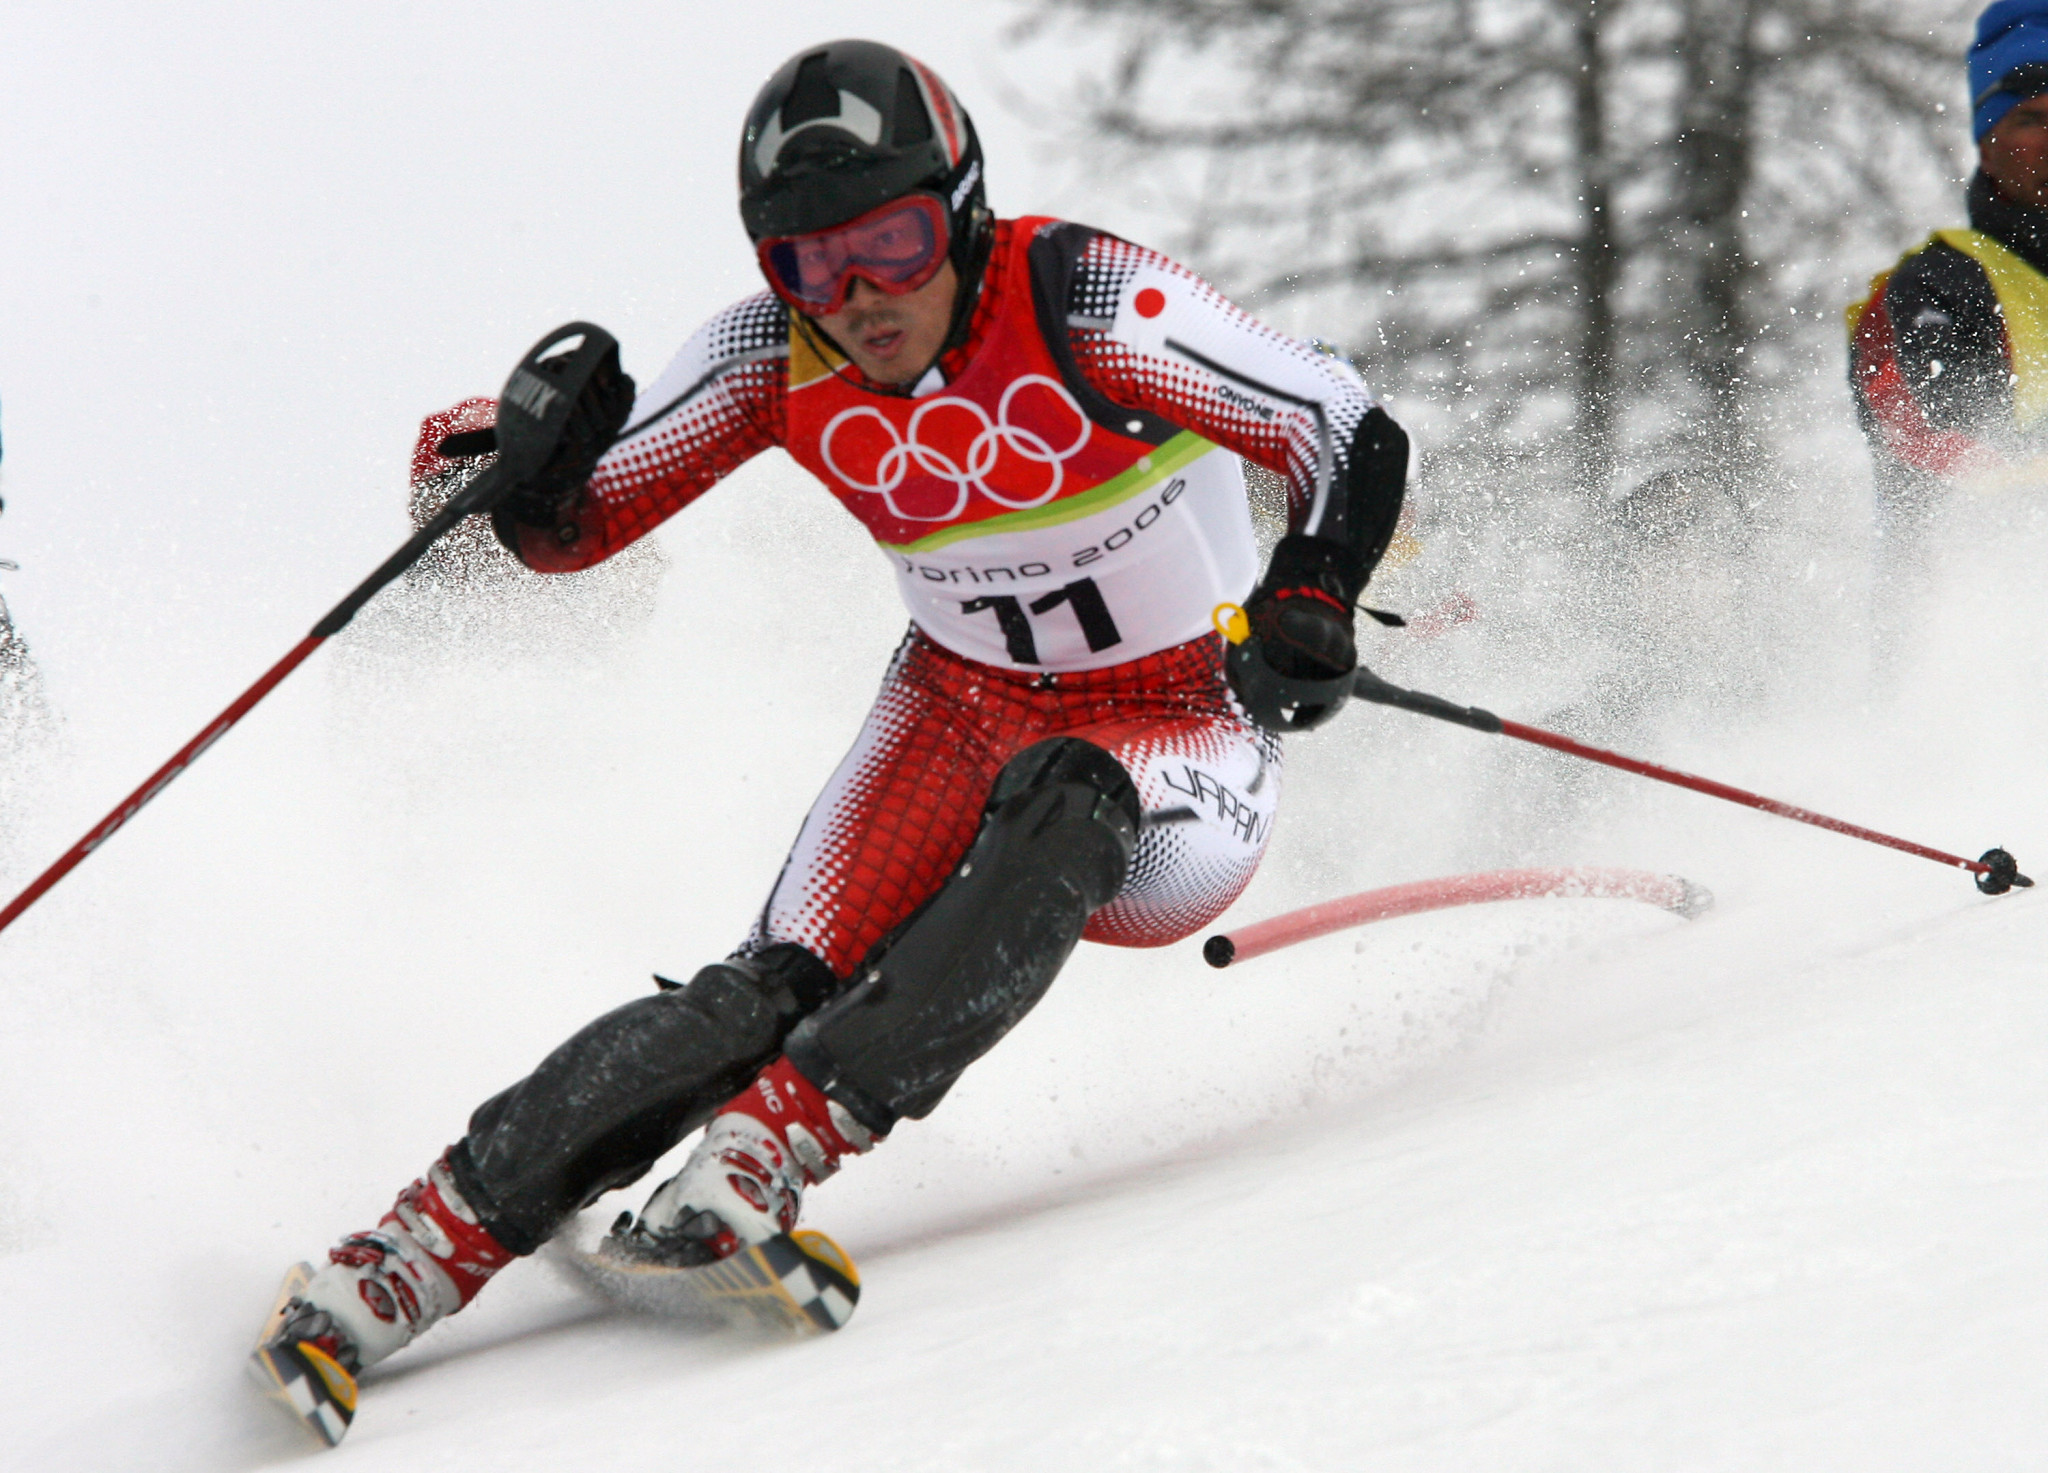 Sestriere was one of the main venues for the 2006 Winter Olympic and Paralympic Games in Turin ©Getty Images